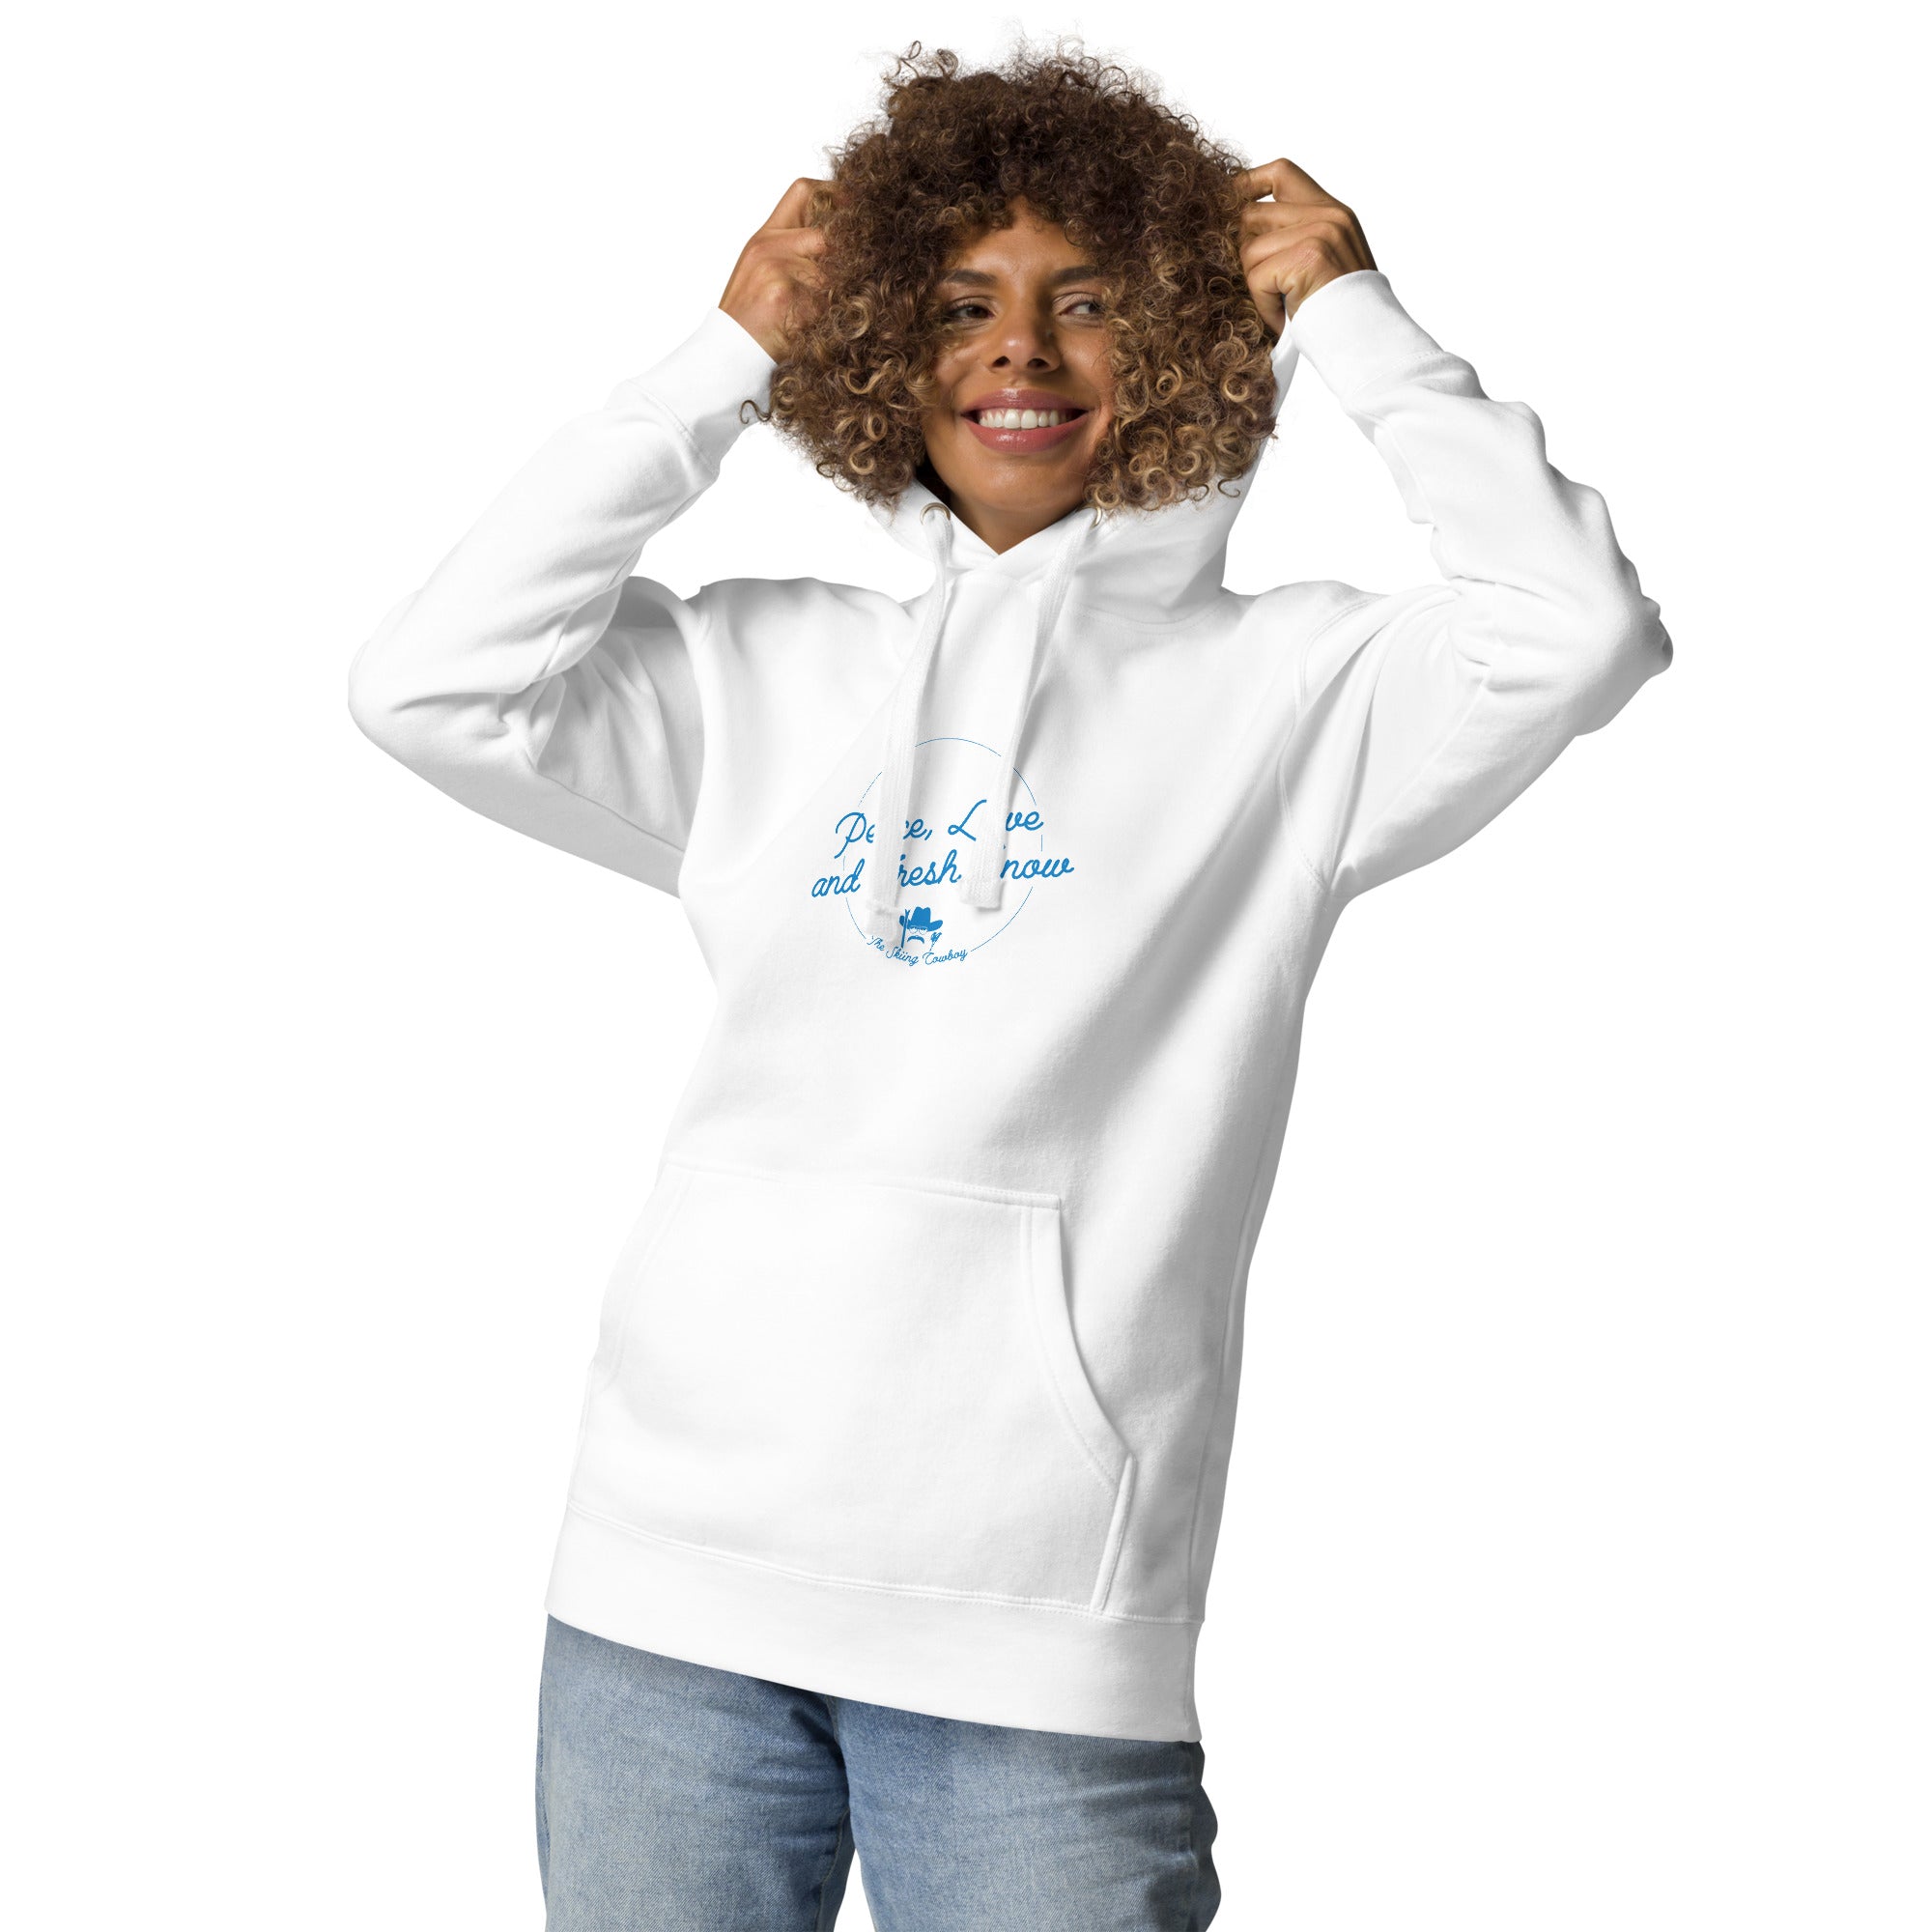 Unisex Cotton Hoodie Peace, Love and Fresh Snow